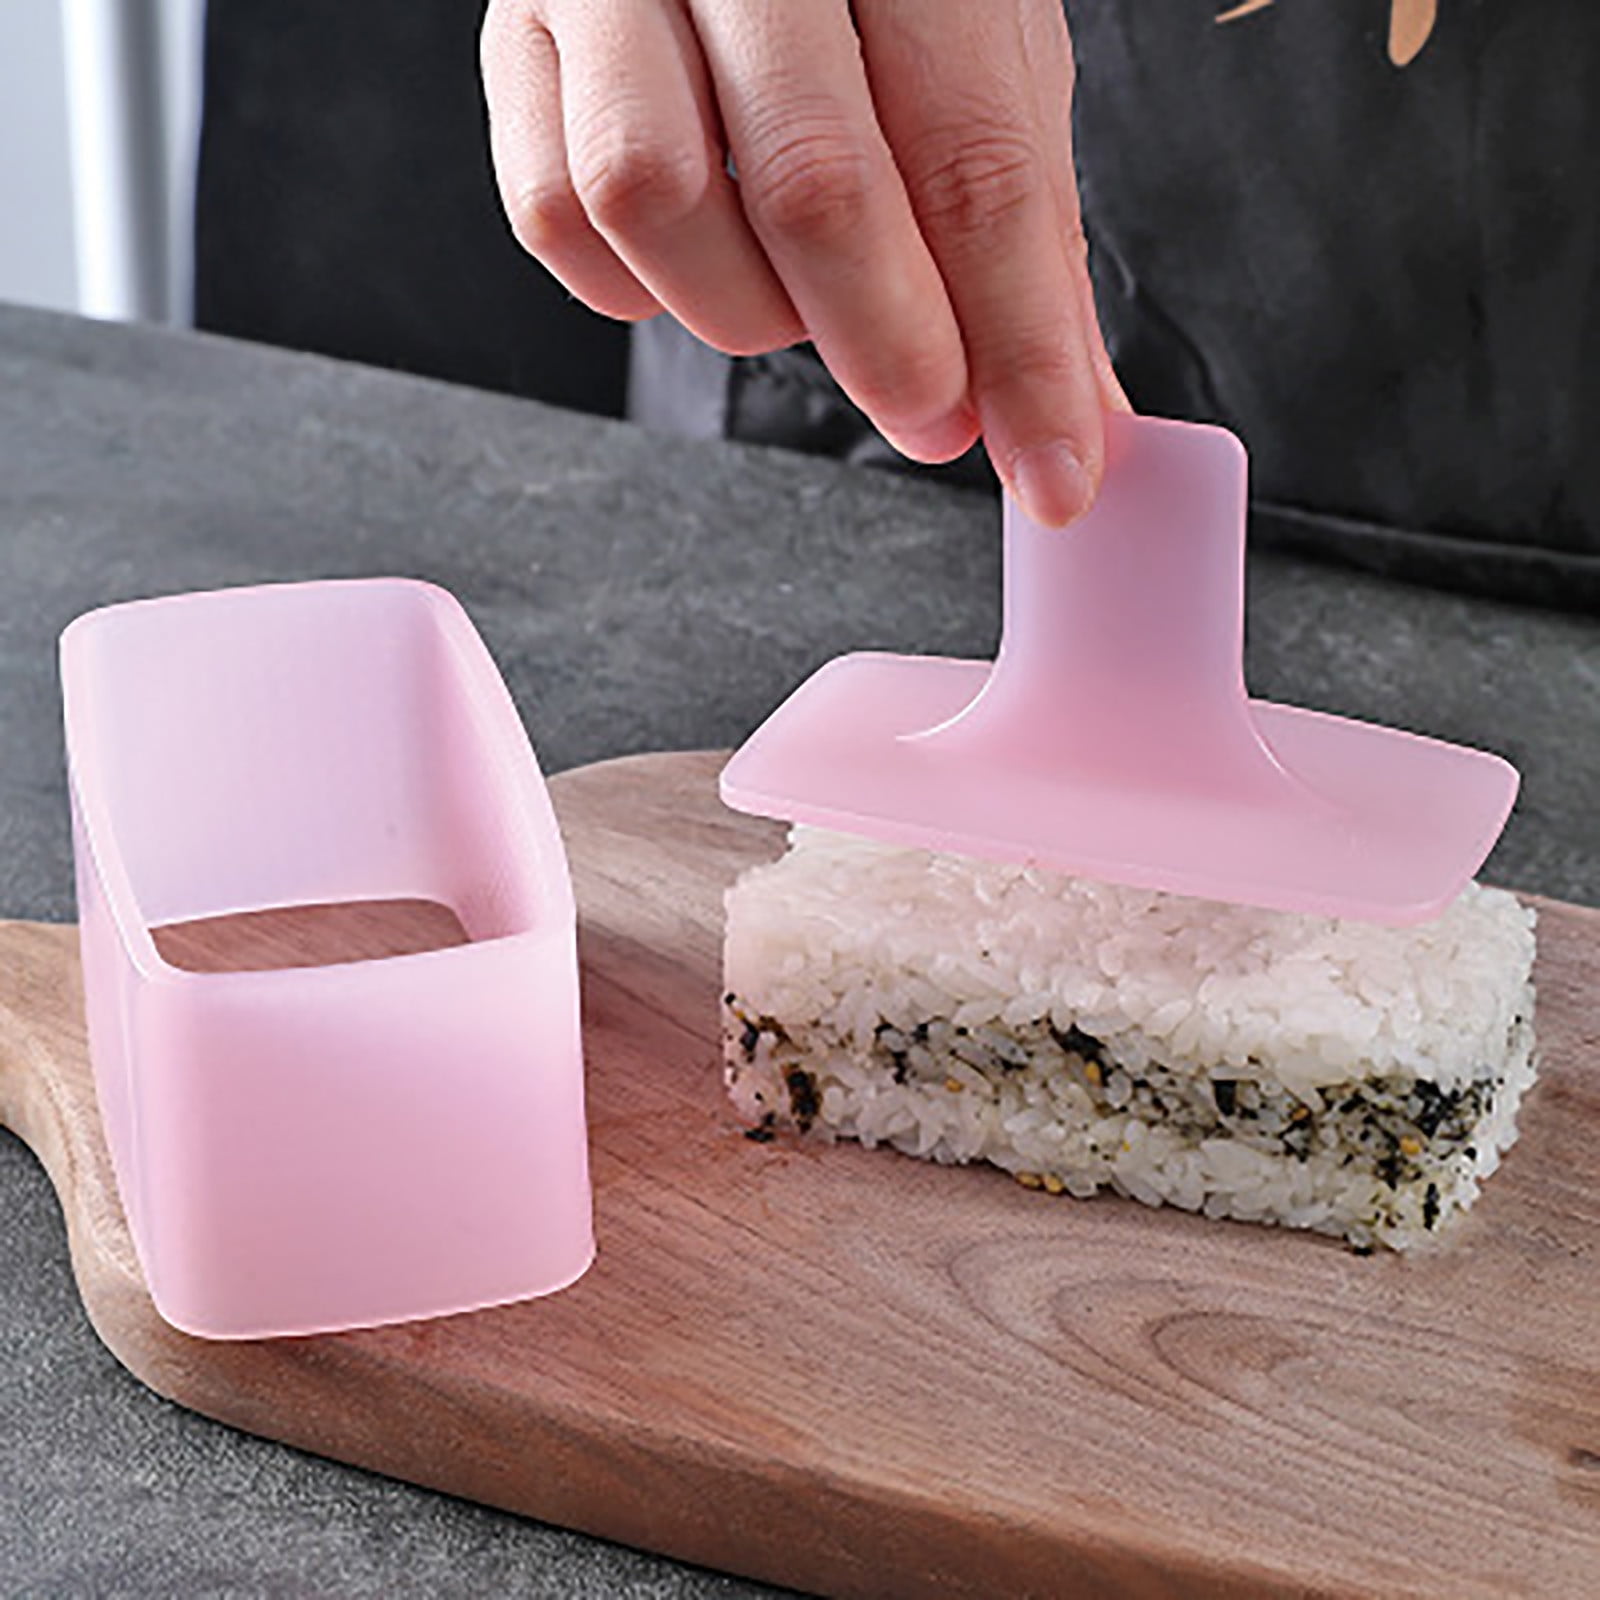 Apmemiss Wholesale Sushi Making Kit Mold, Luncheon Meat Press, Children's Food Supplement Tool, Boy's, Size: Small, Pink